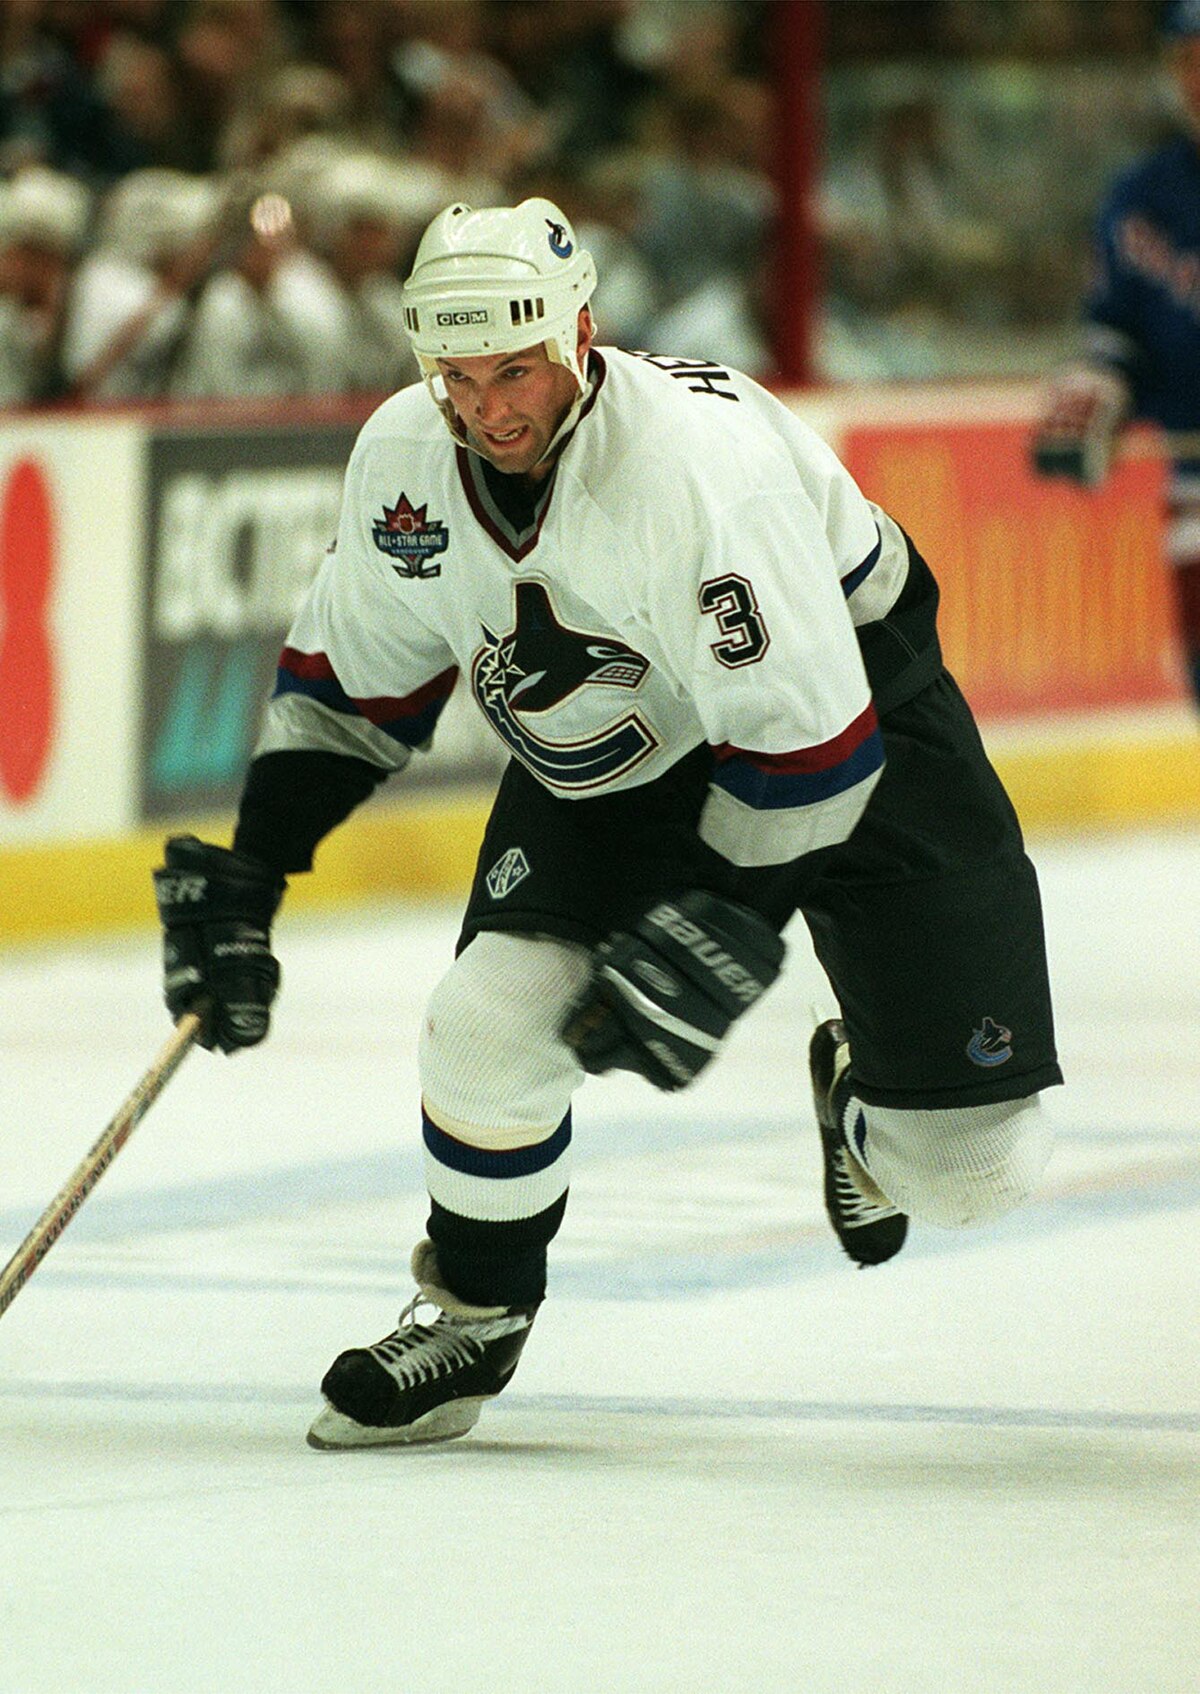 Brian Sutter Hockey Stats and Profile at